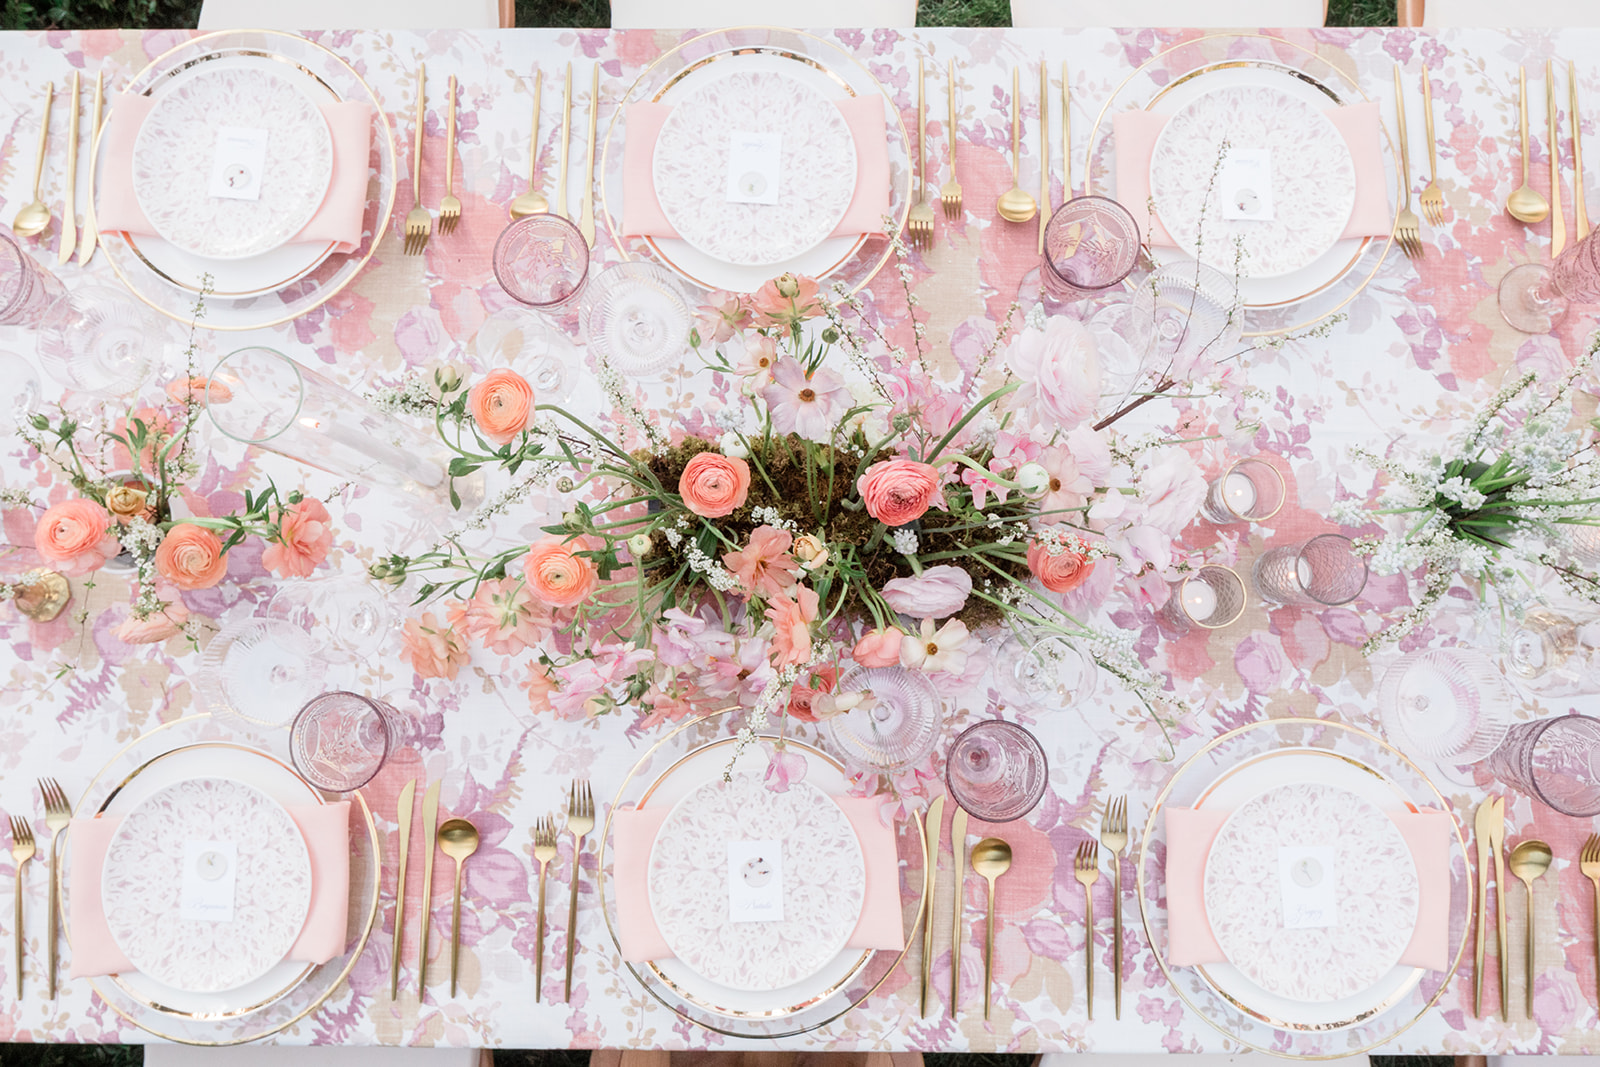 Tabletop rentals with pink and florals. Inspiration for Easter Dinner and Jewish Passover celebrations.